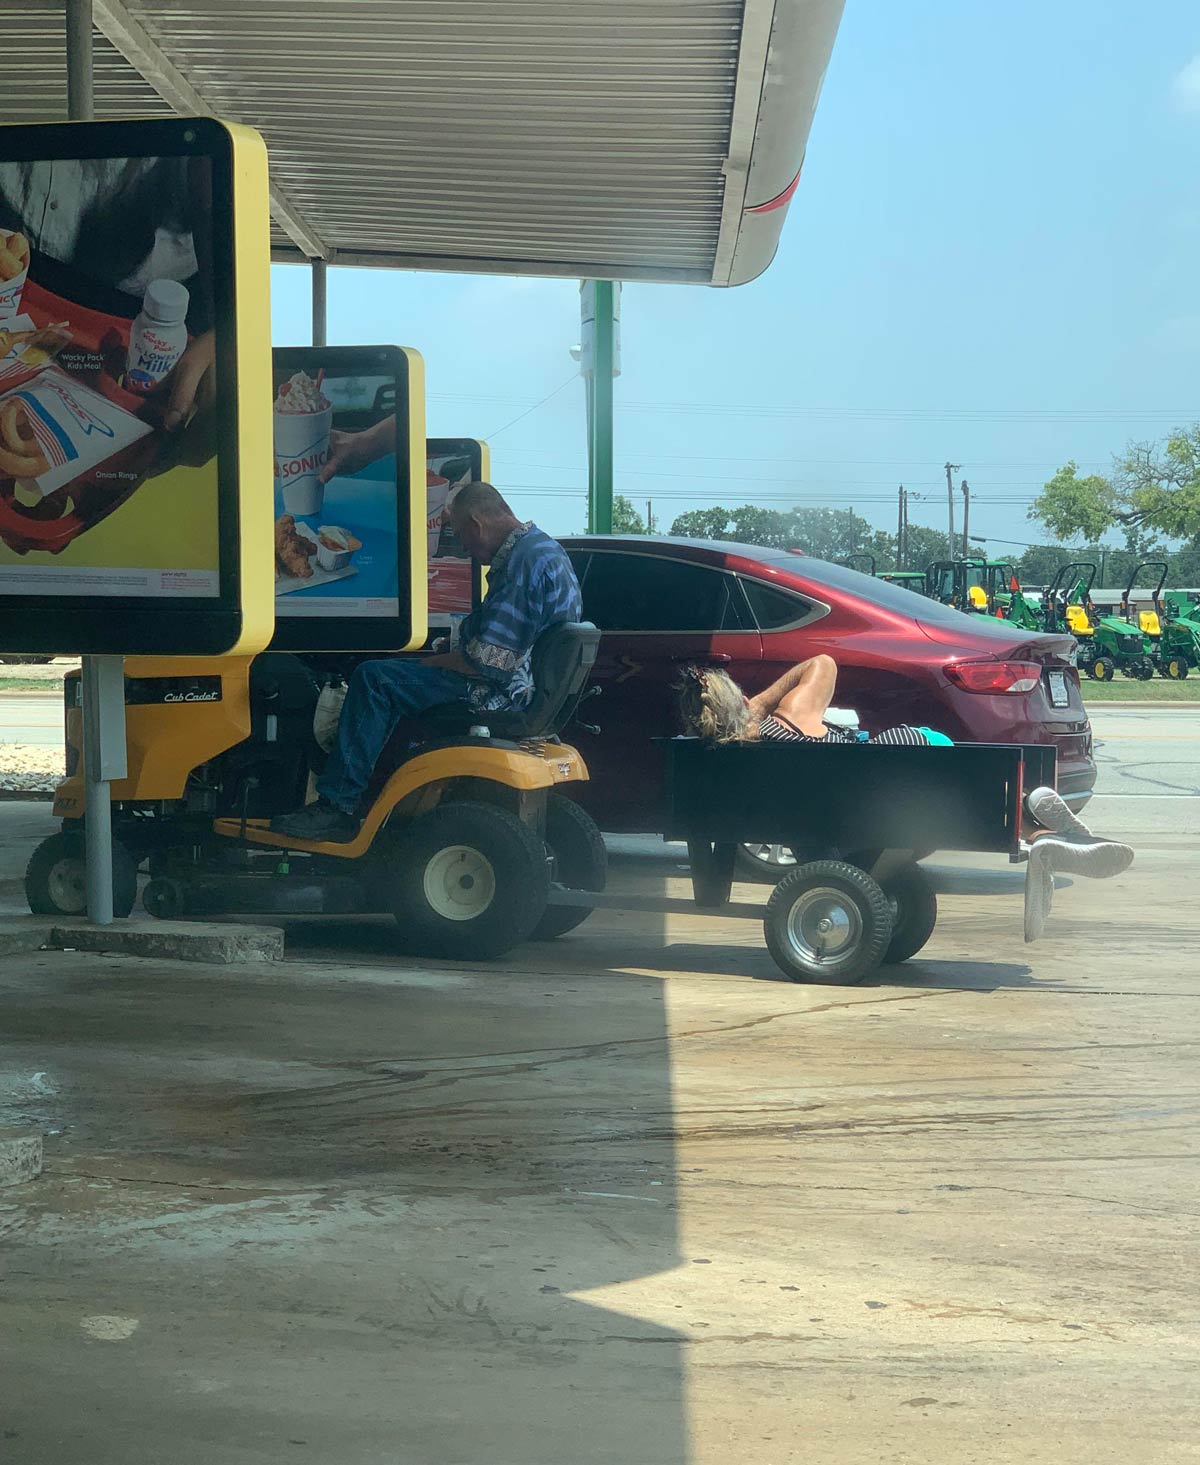 This man towed his wife to sonic on a lawnmower to get a vanilla ice cream cone